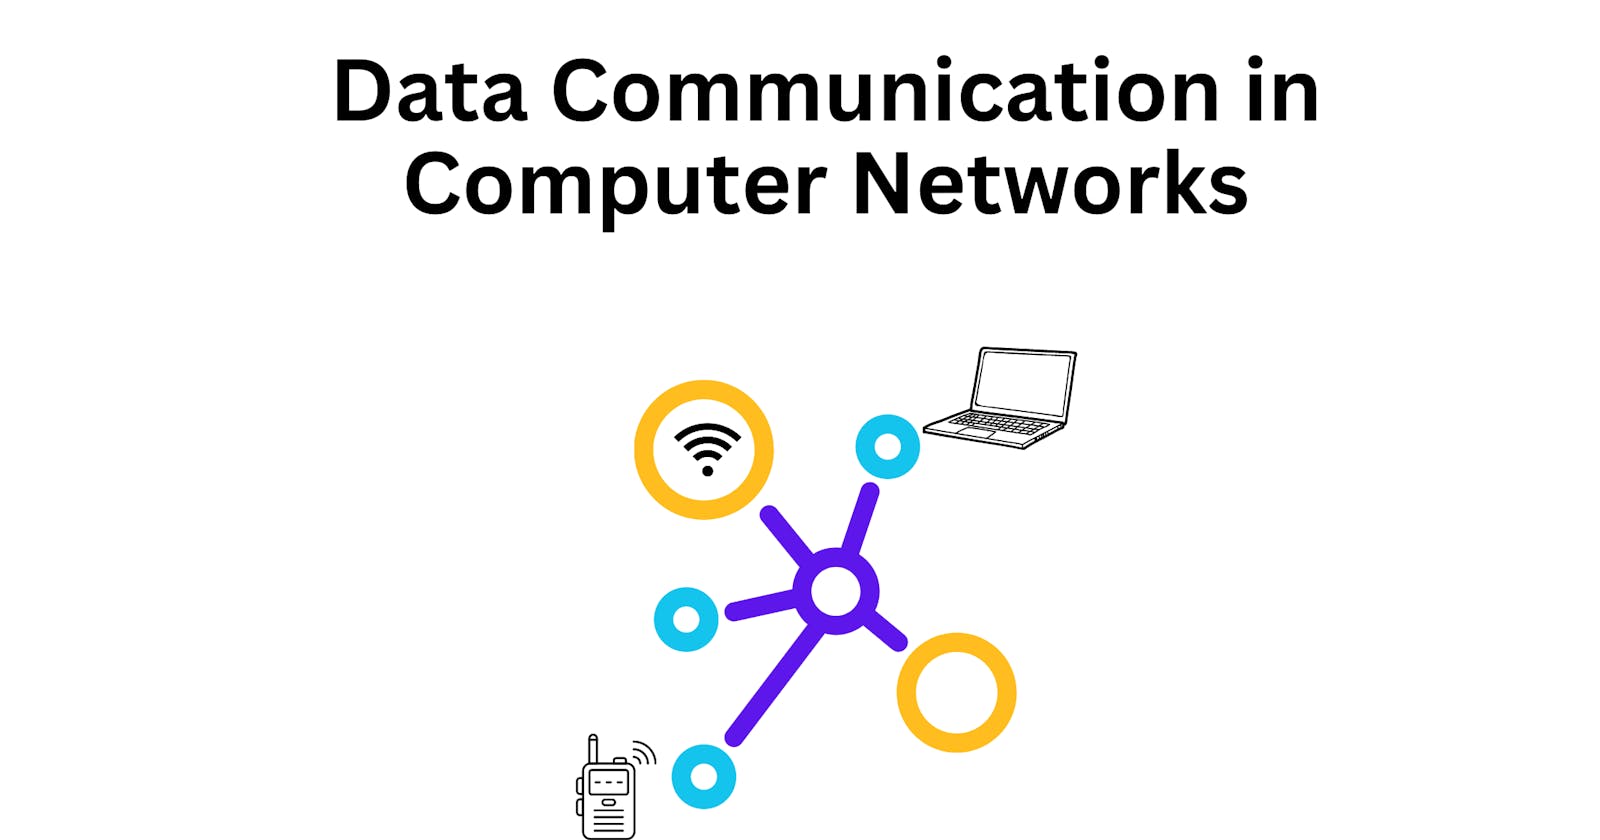 Data Communication in Computer Networks